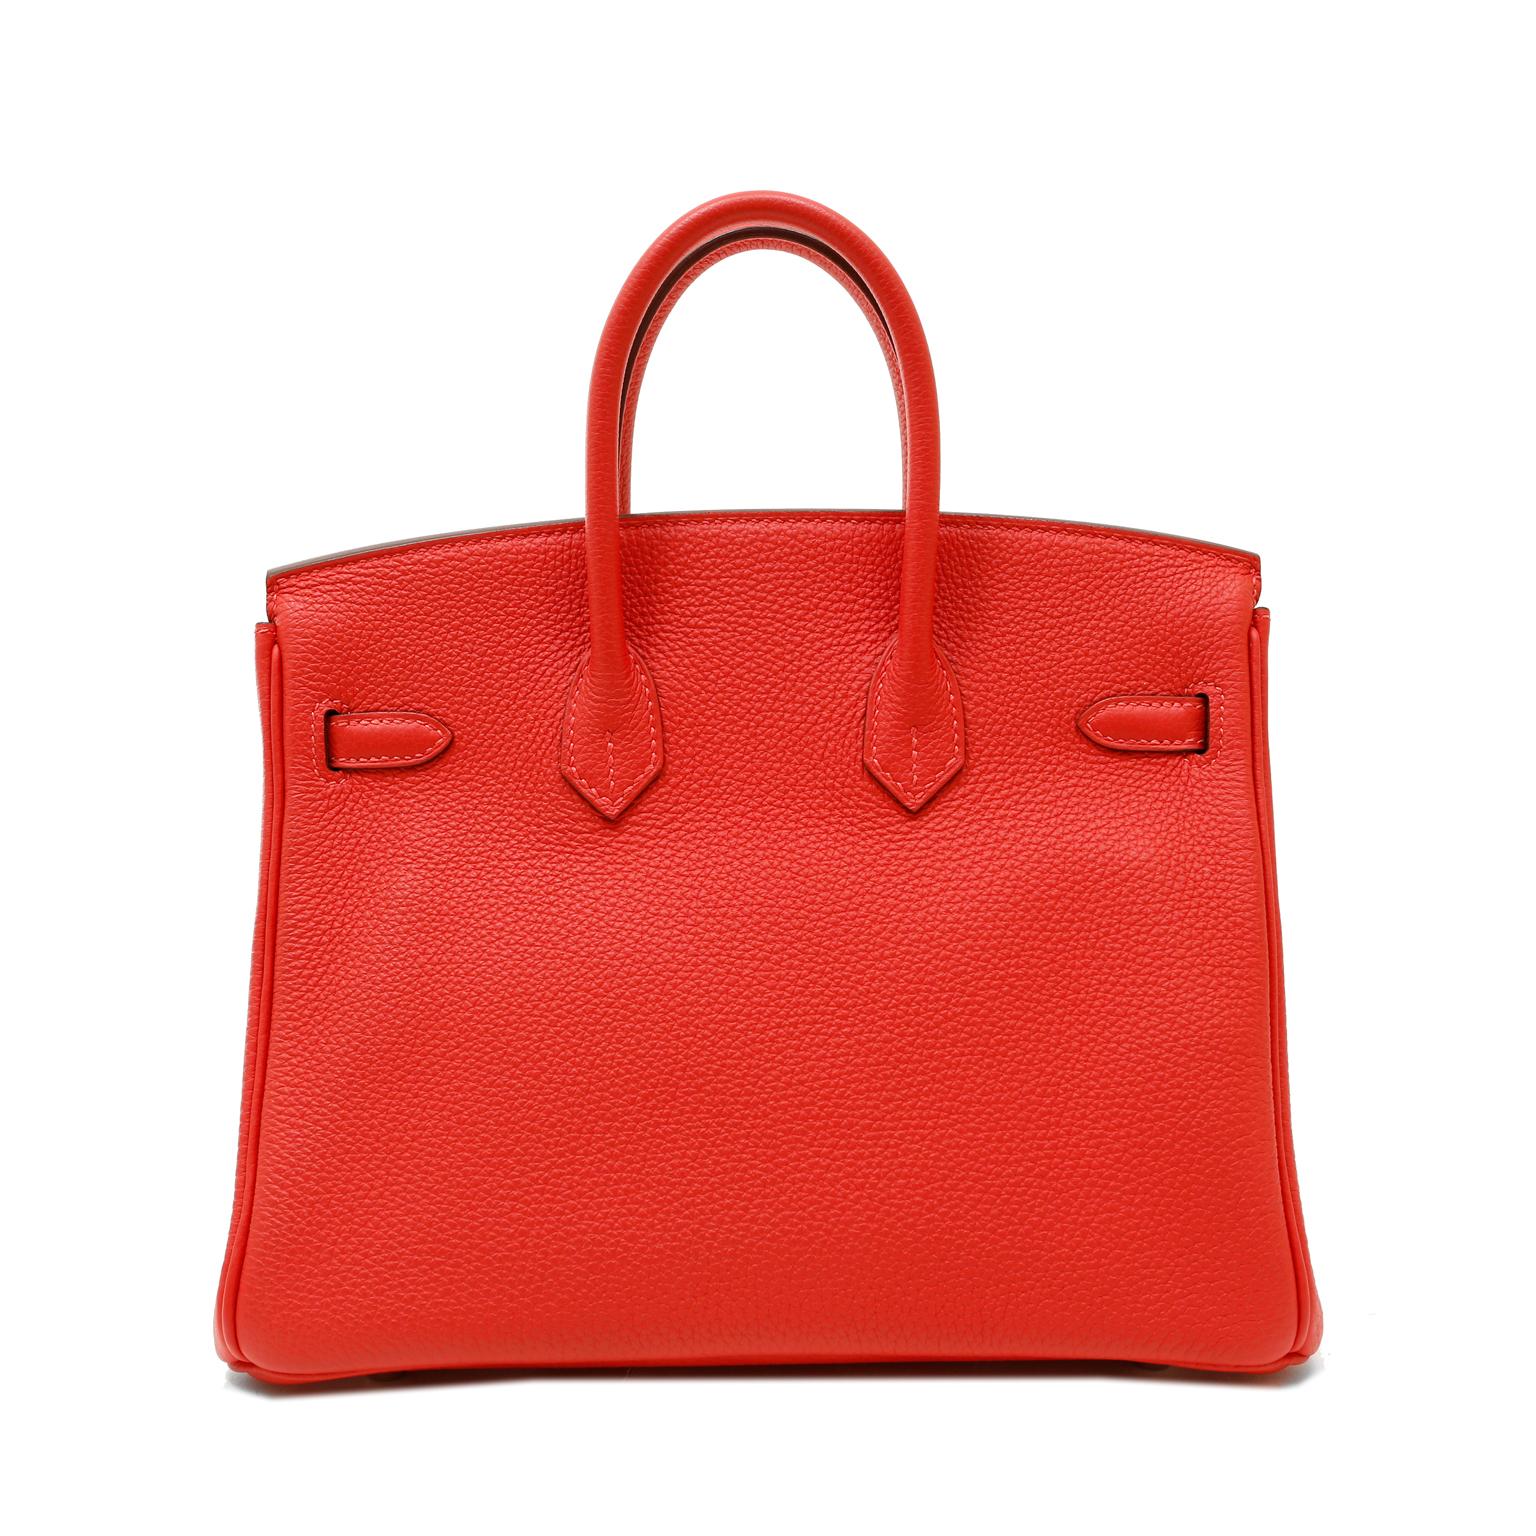 This authentic Hermès Lipstick Red Togo 25 cm Birkin is in pristine unworn condition with the protective plastic intact on the hardware.  Highly sought after in the 25 cm silhouette, this firecracker Birkin is a fabulous collectible.  
Lipstick red